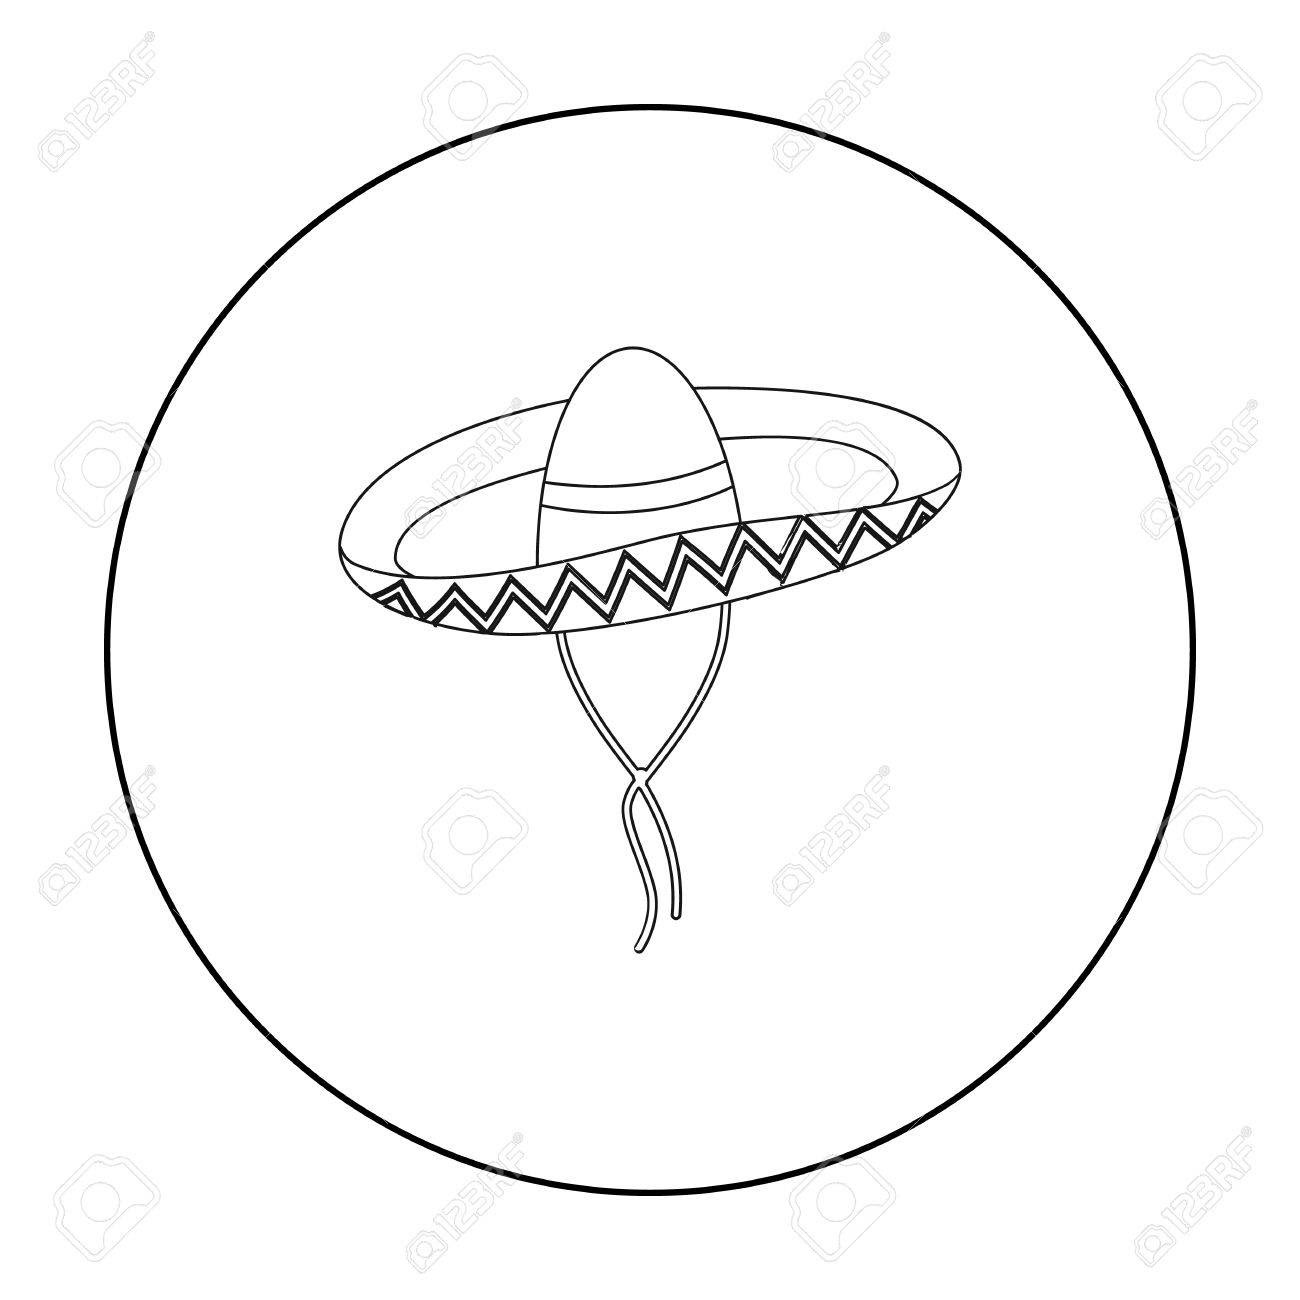 How To Draw A Sombrero Hat